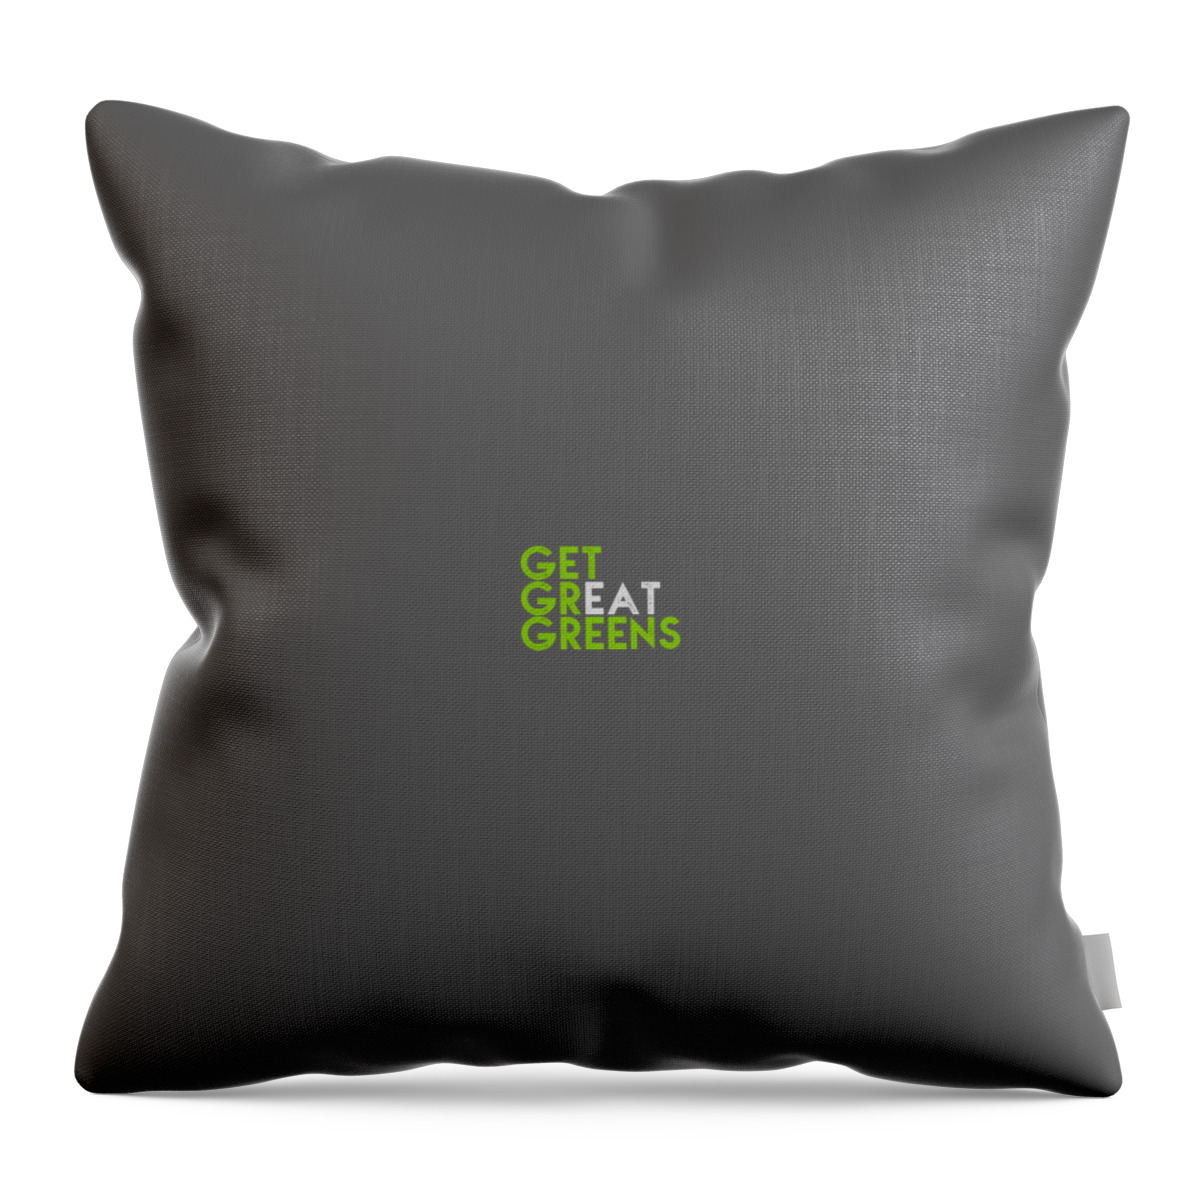  Throw Pillow featuring the drawing Get Great Greens - green and gray by Charlie Szoradi